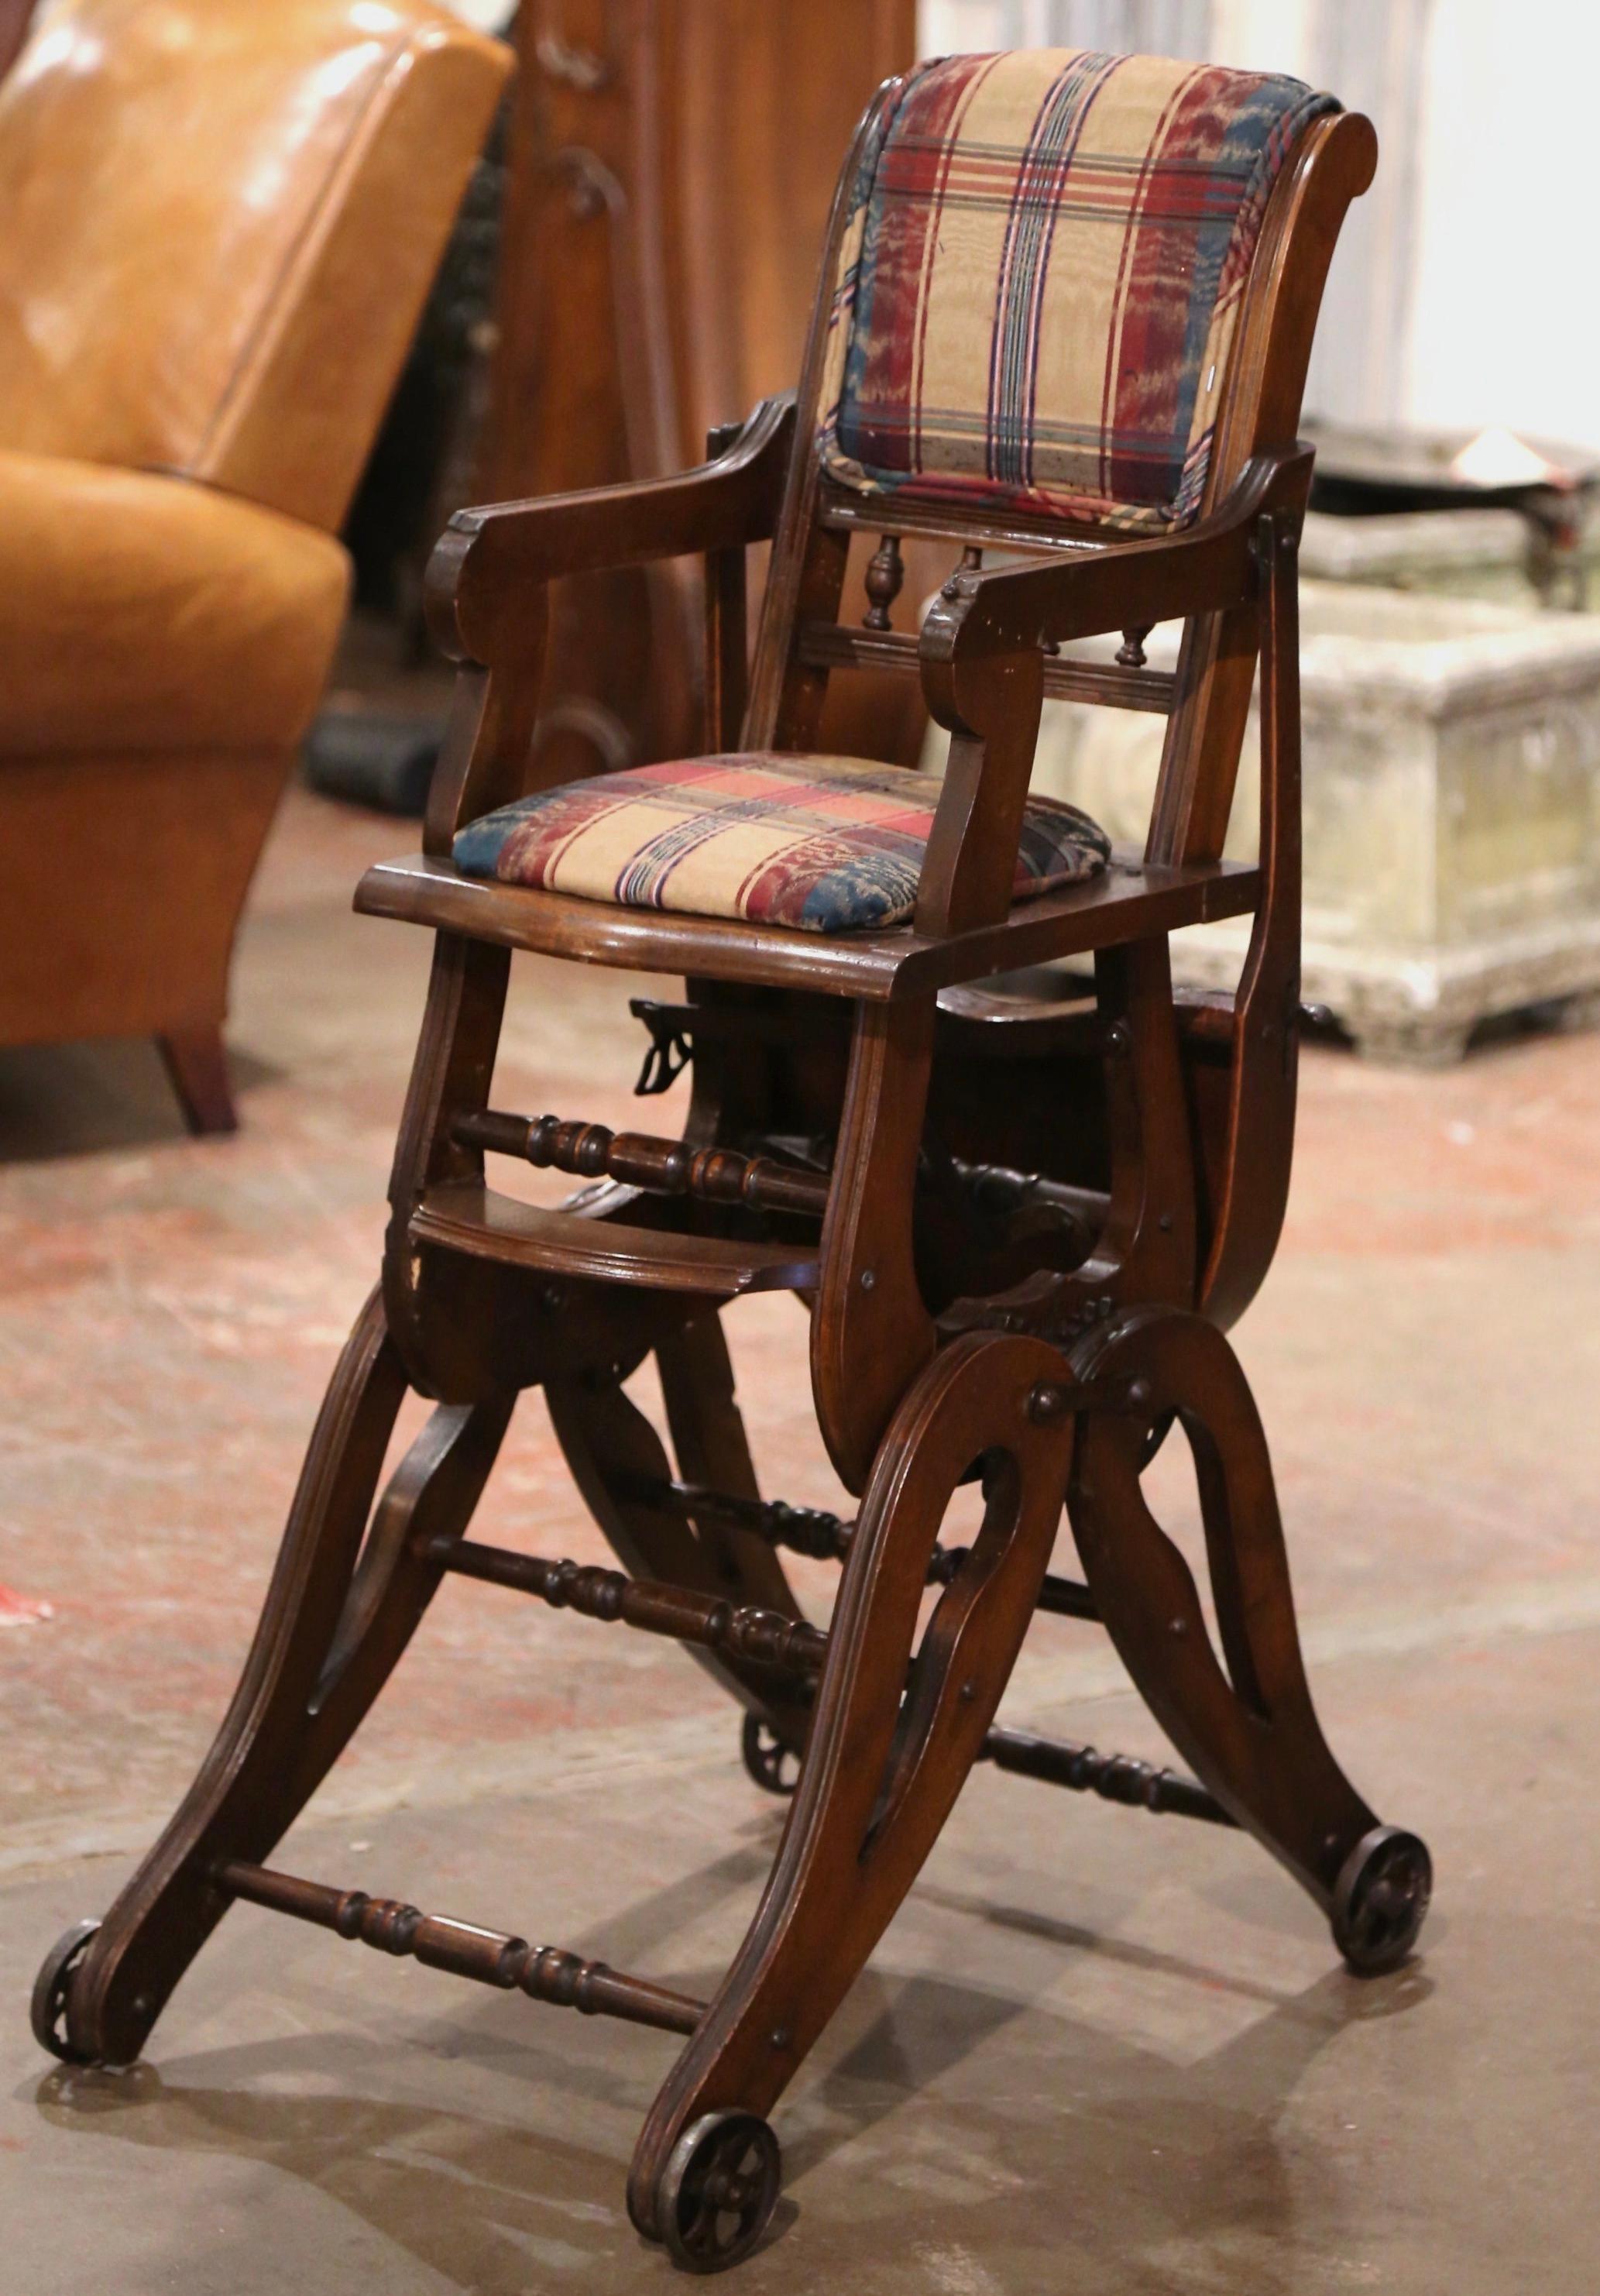 Patinated 19th Century English Carved Walnut and Fabric Convertible High Chair to Rocker For Sale